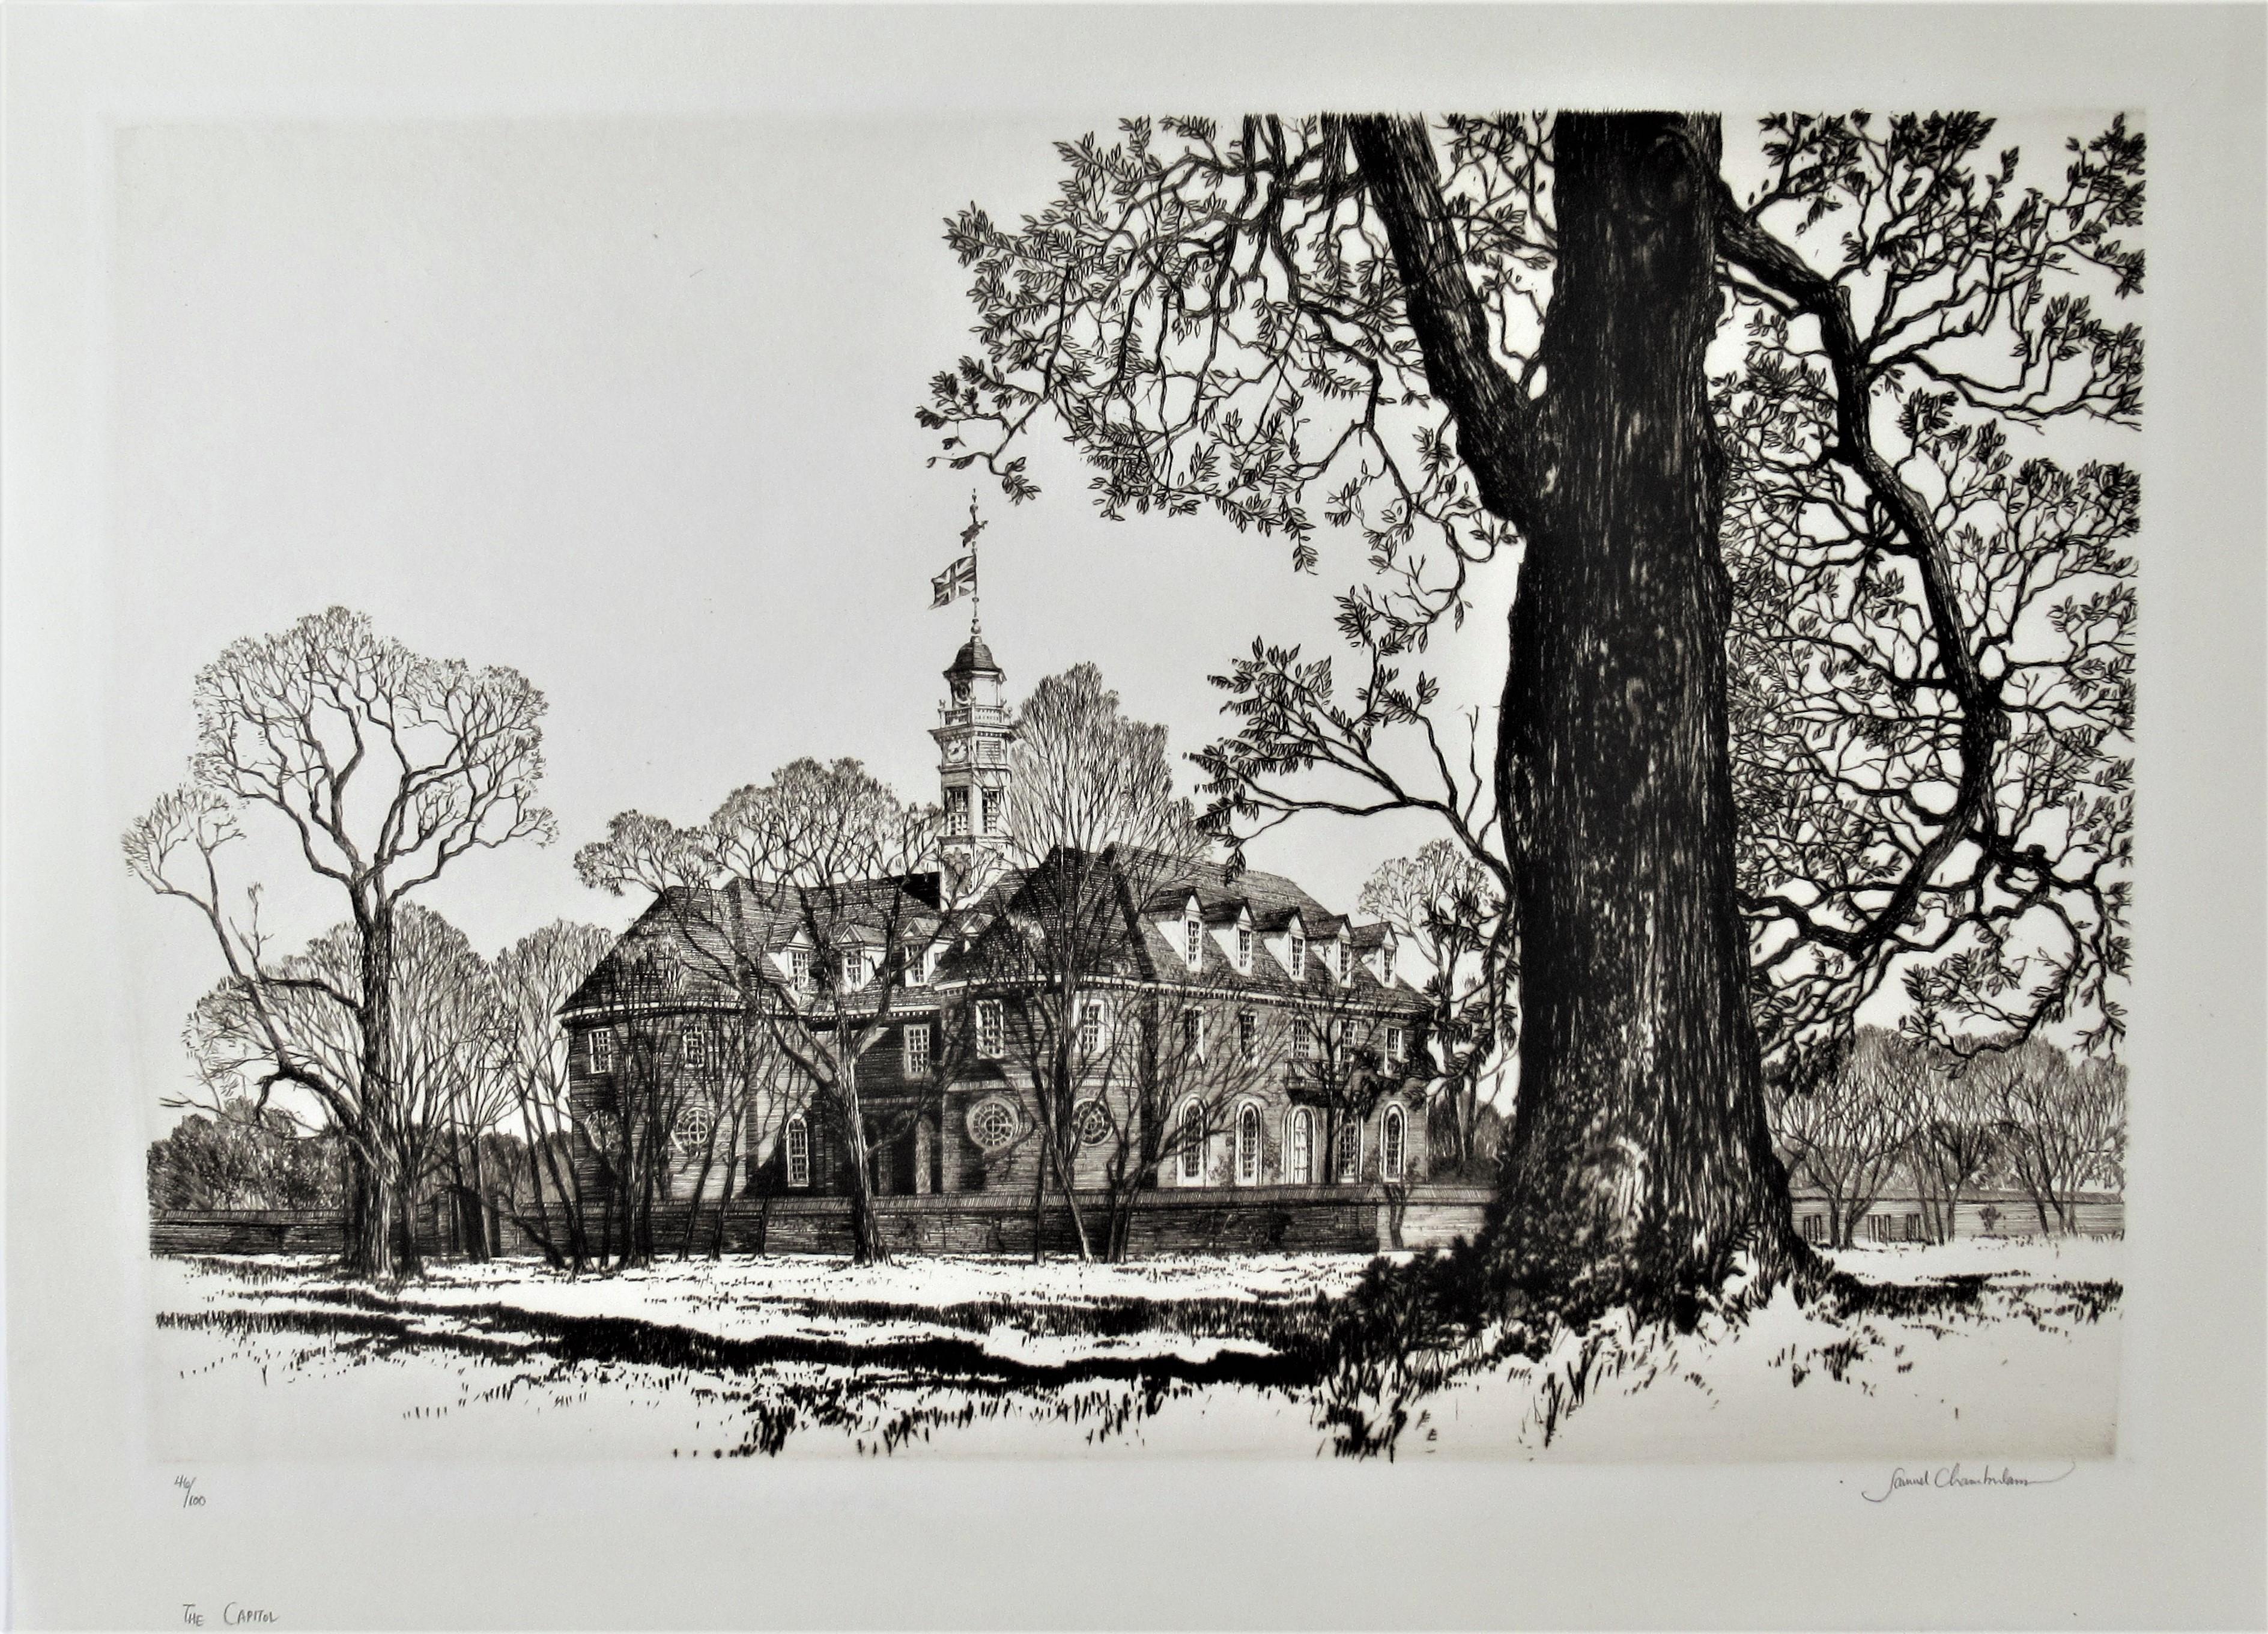 The Capitol, The Williamsburg Series